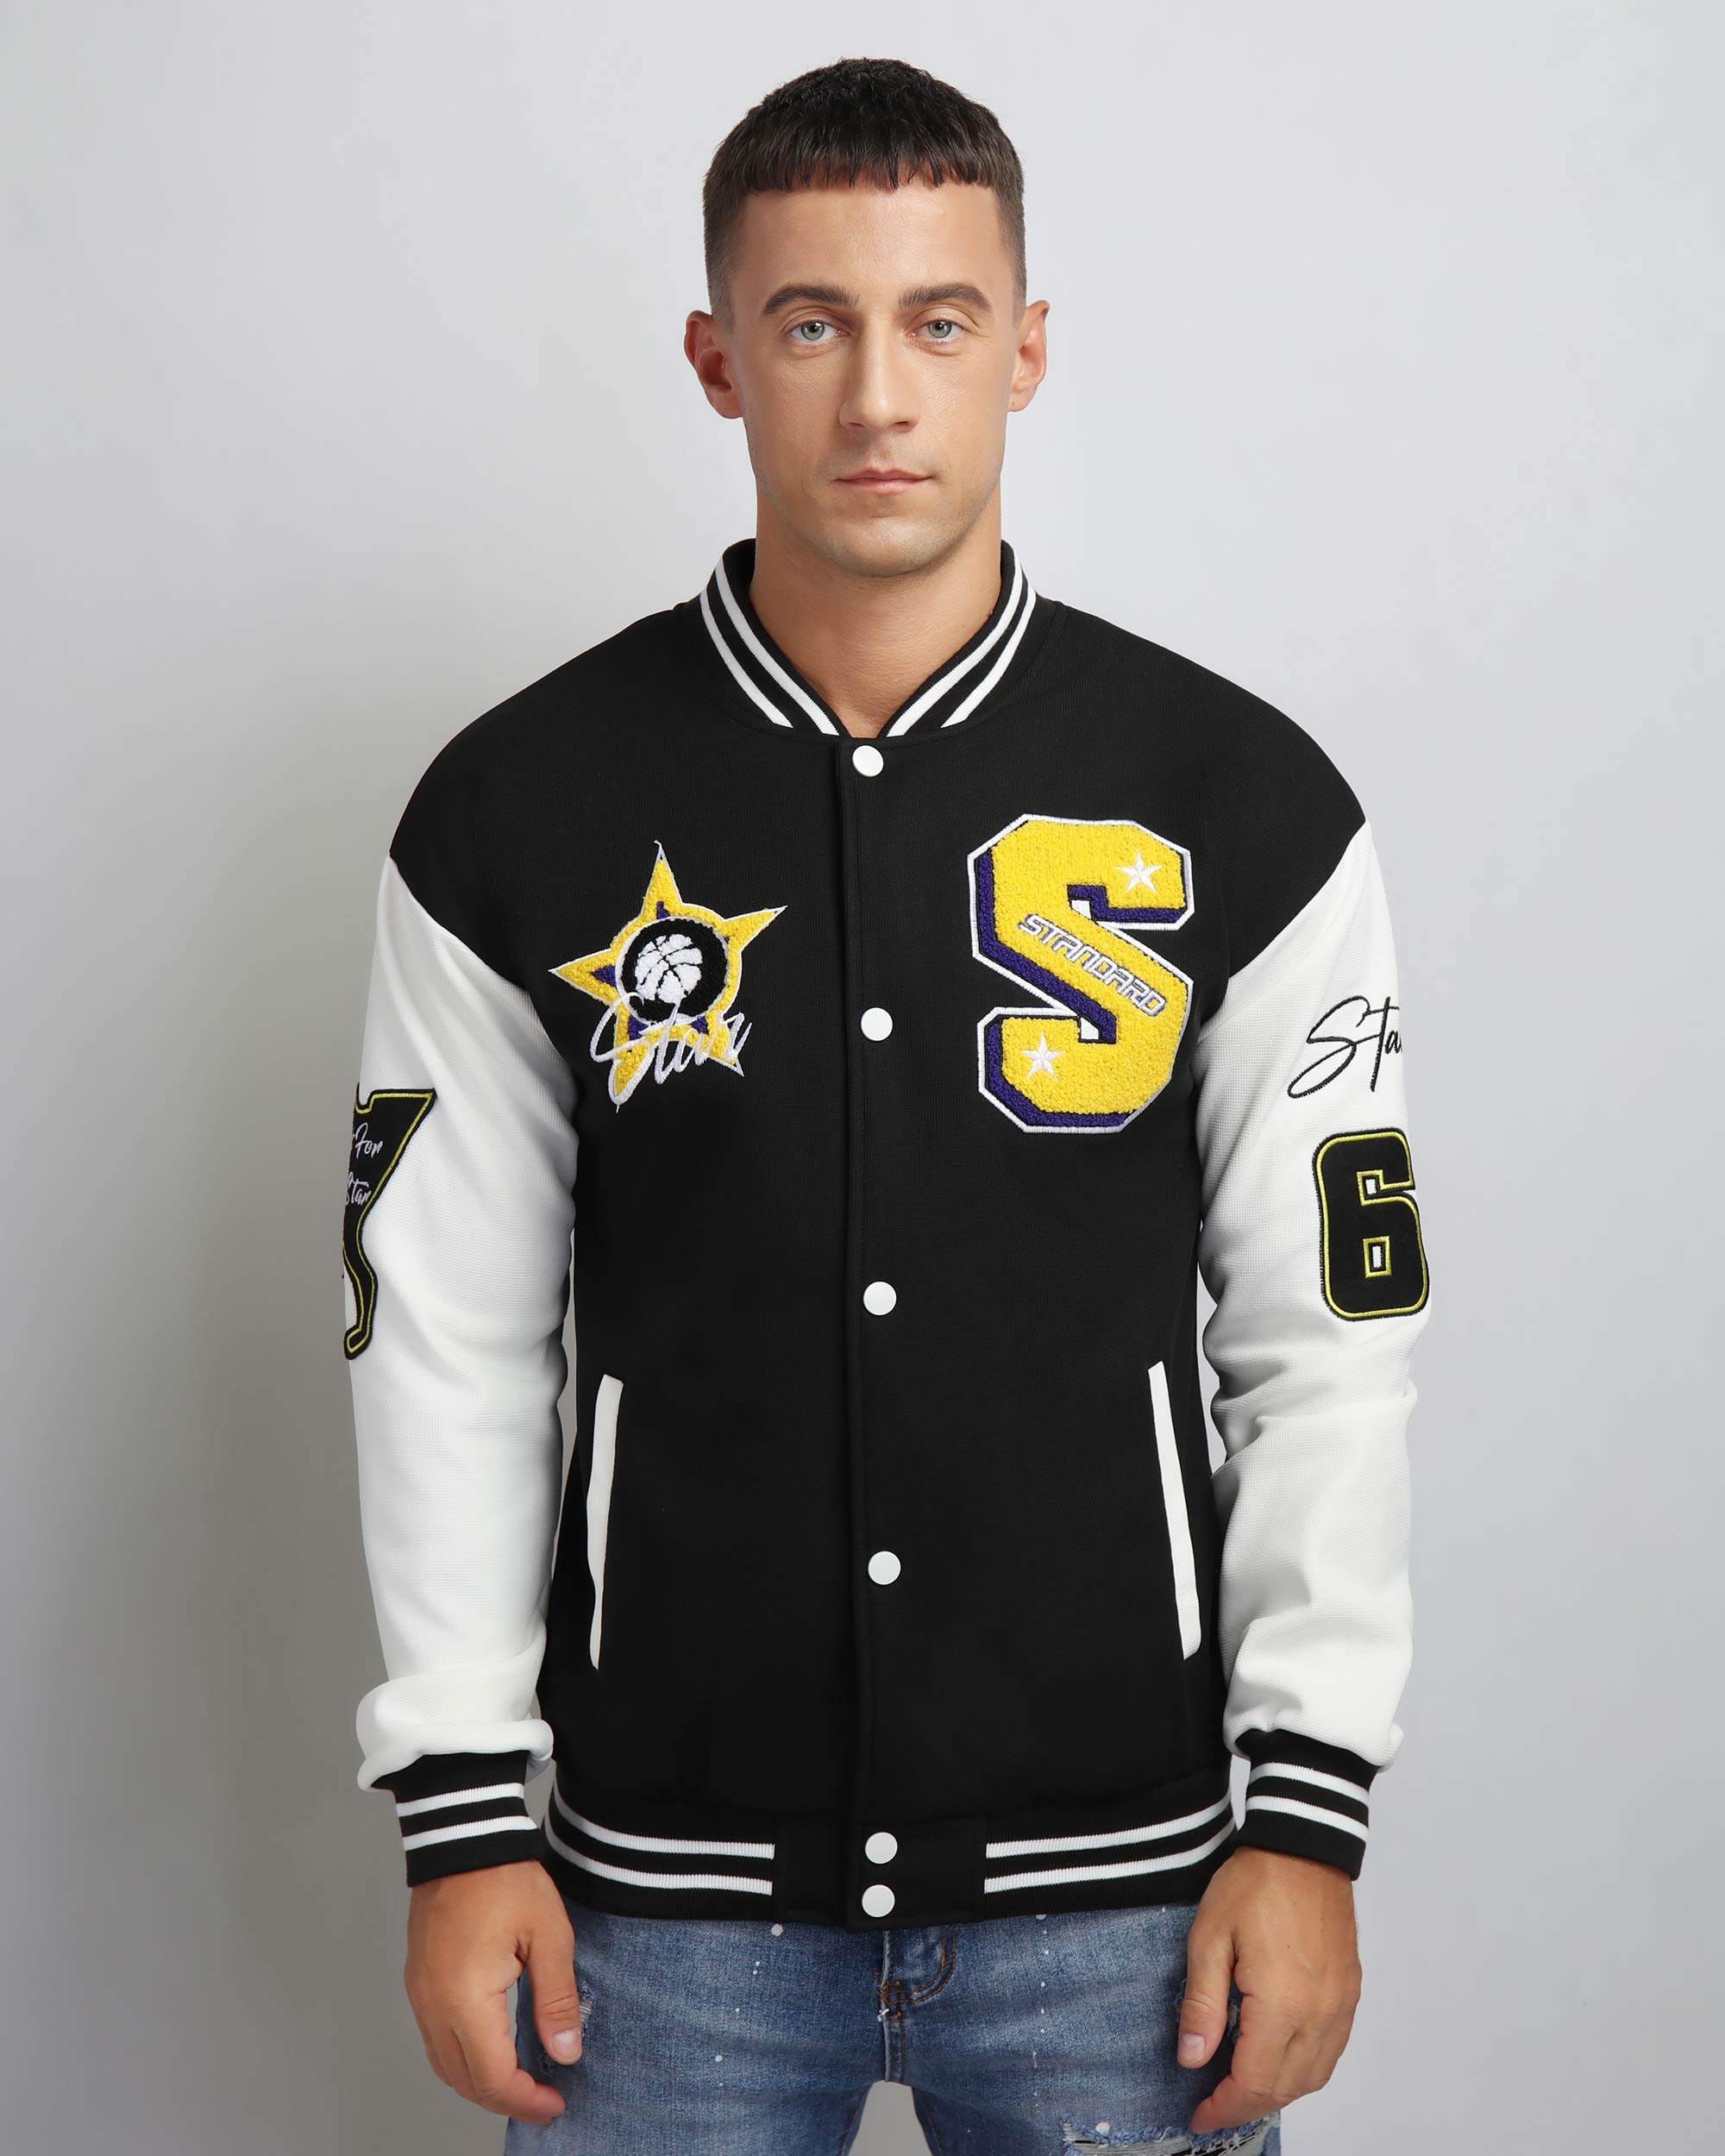 Athletic Tradition: Men's College Baseball Jacket with Varsity Stripes ...